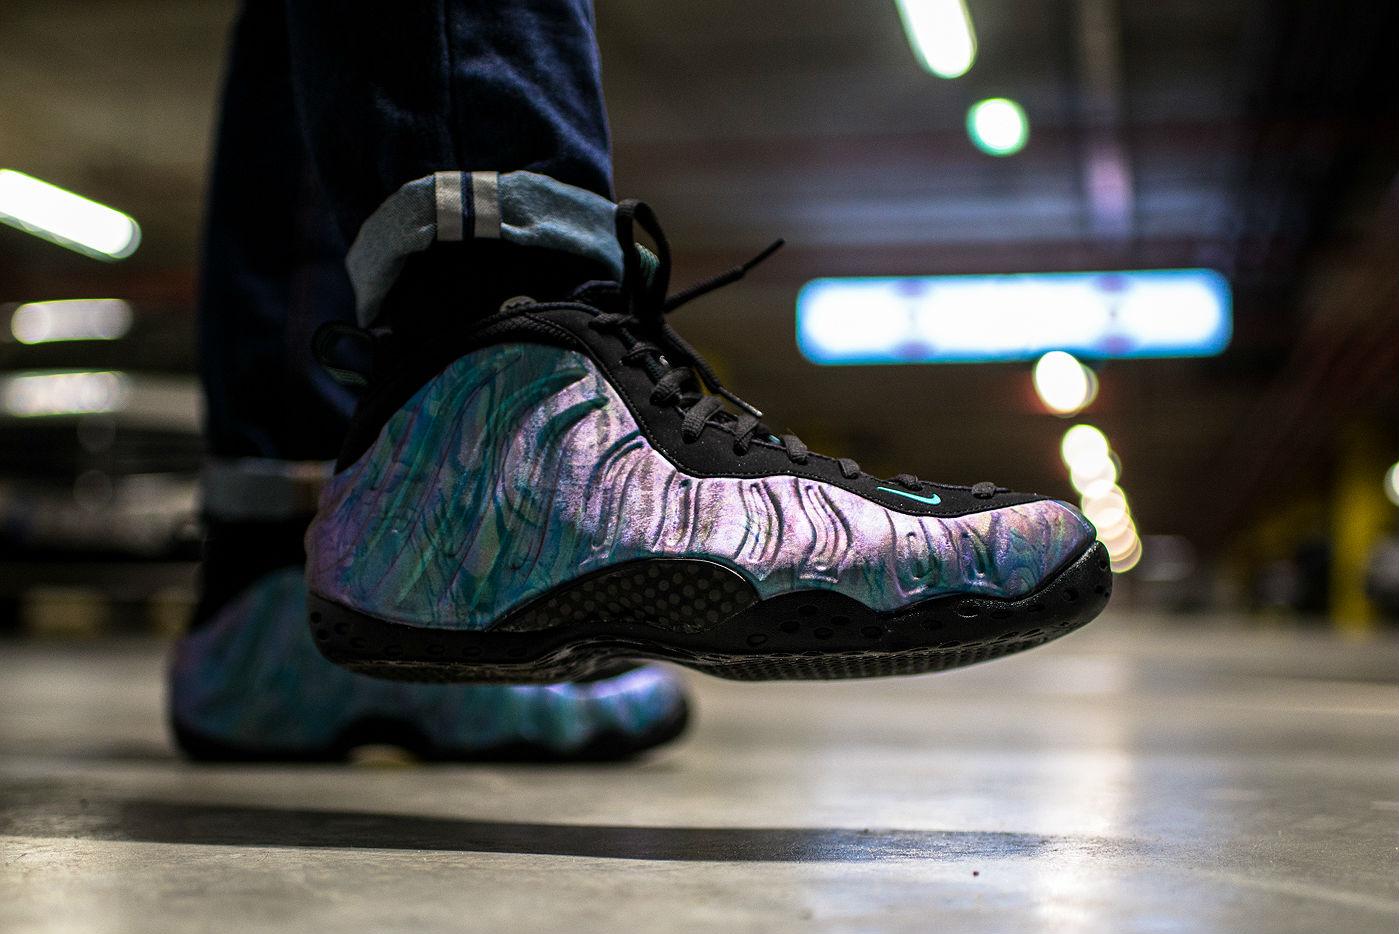 An On-Foot at the Nike Air Foamposite One 'Abalone' - WearTesters